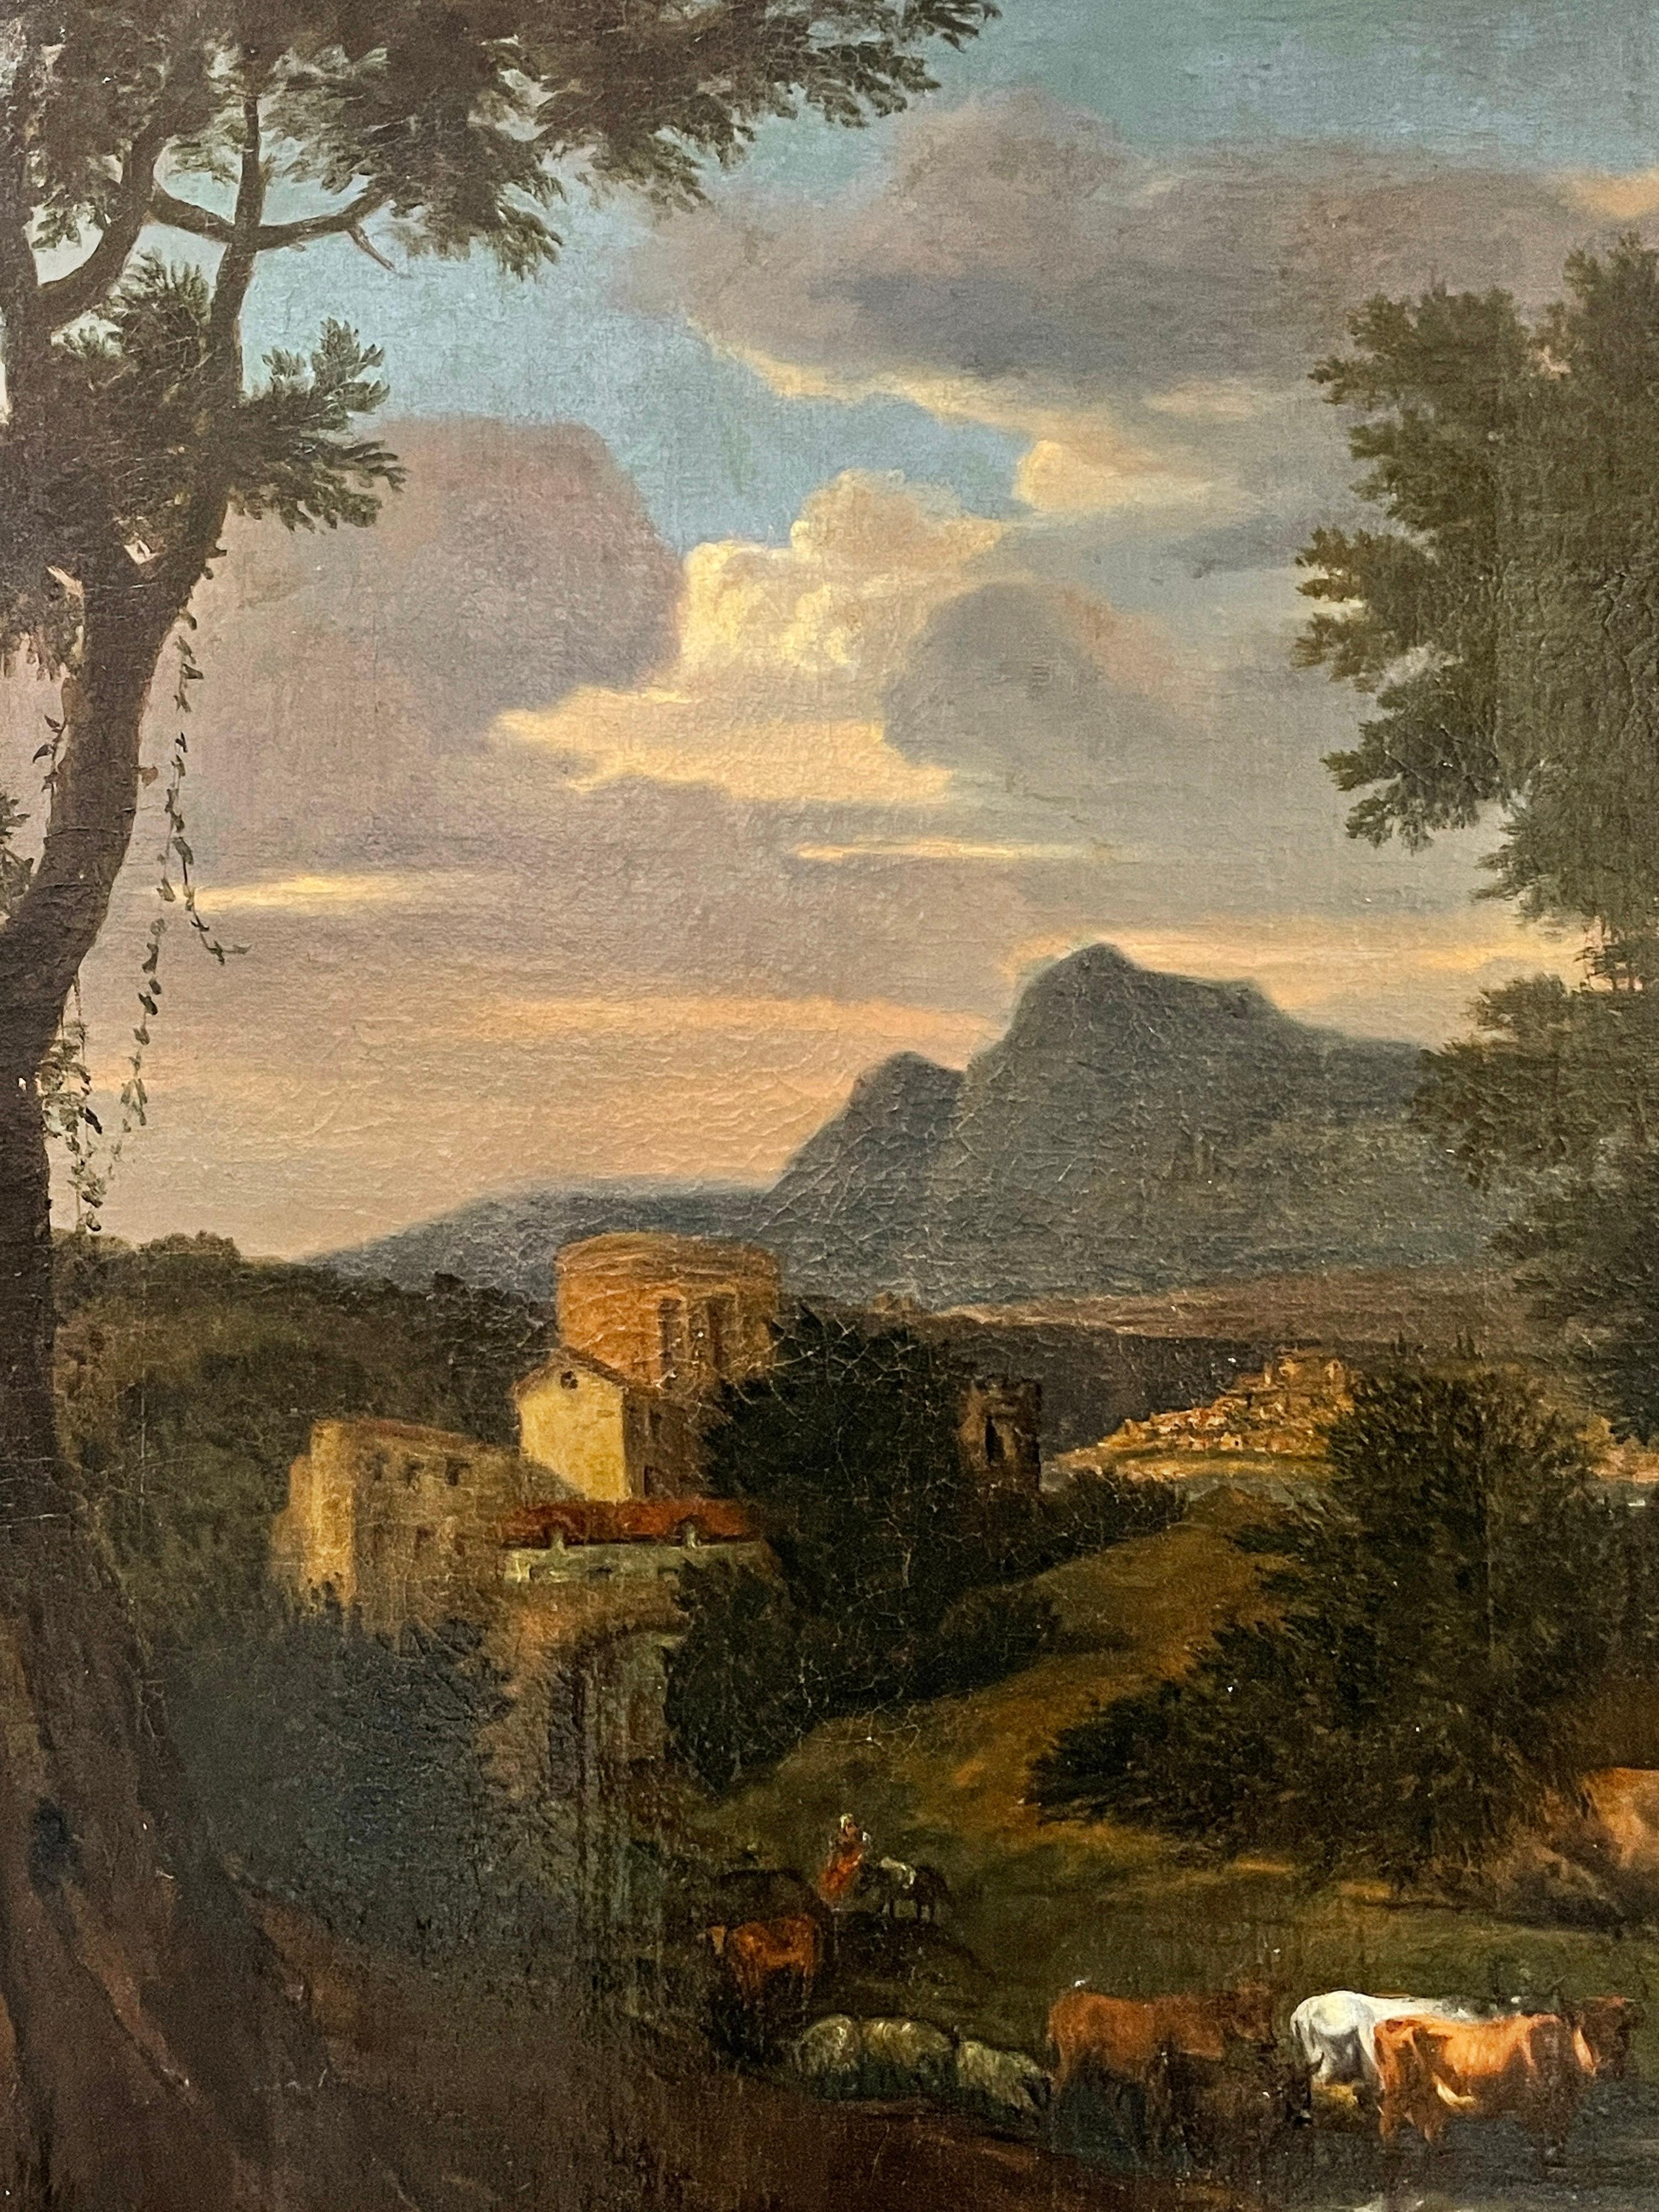 The Arcadian Landscape
Italian School, 18th century
oil painting on canvas, unframed
canvas size: 32 x 40 inches
condition: excellent condition for its age, fully restored. 
provenance: from a private collection in Paris, France. 

Large scale